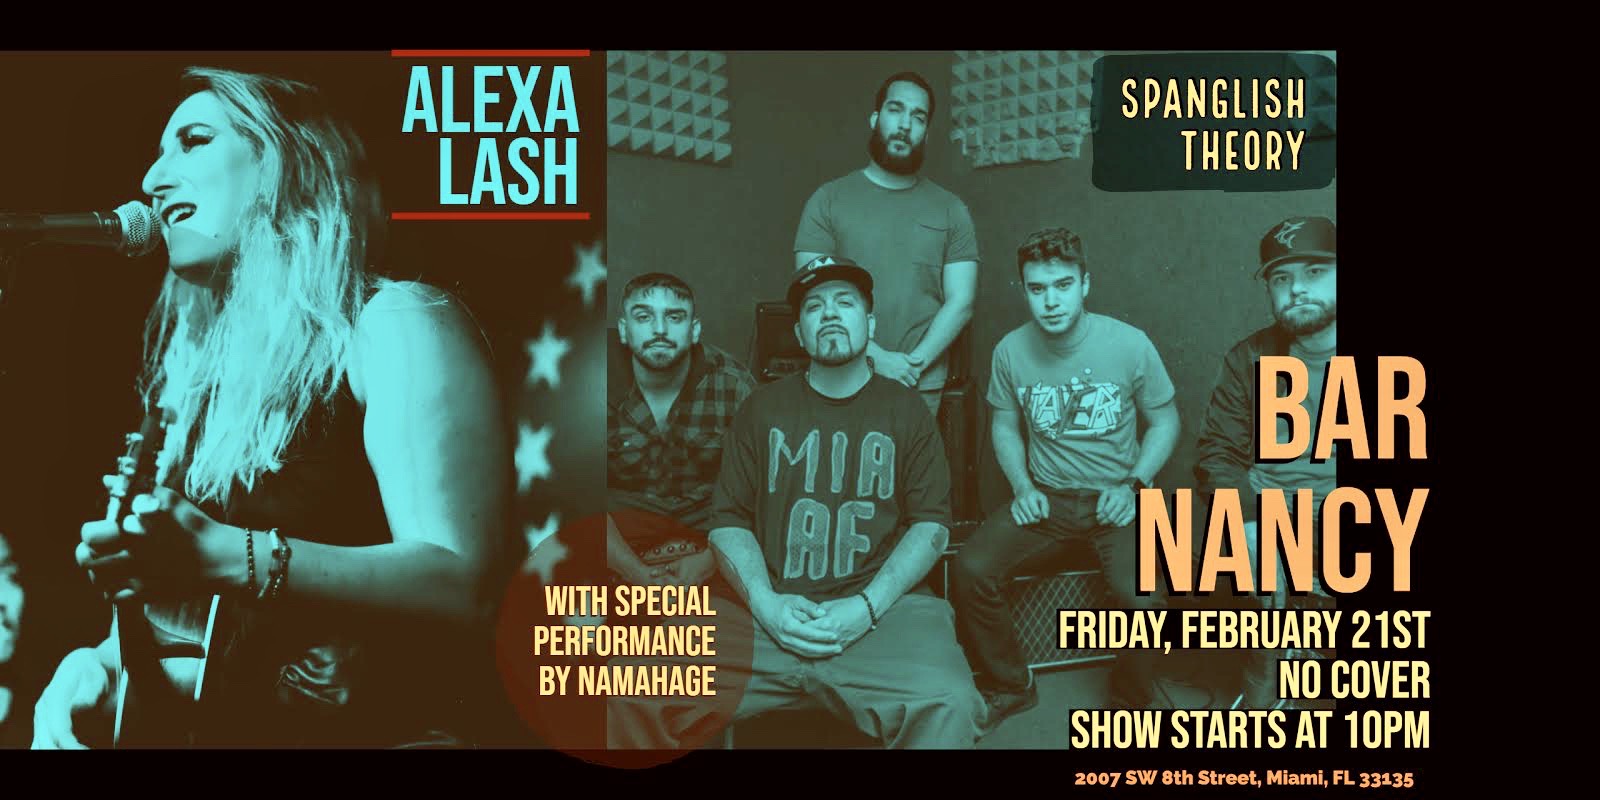 Join us for a night of Alternative Rock and Roll, Hip Hop, Pop, Folk Music and Latin Fusion! Featuring: ALEXA LASH SPANGLISH THEORY Special Guest Performance By: NAMAHAGE!